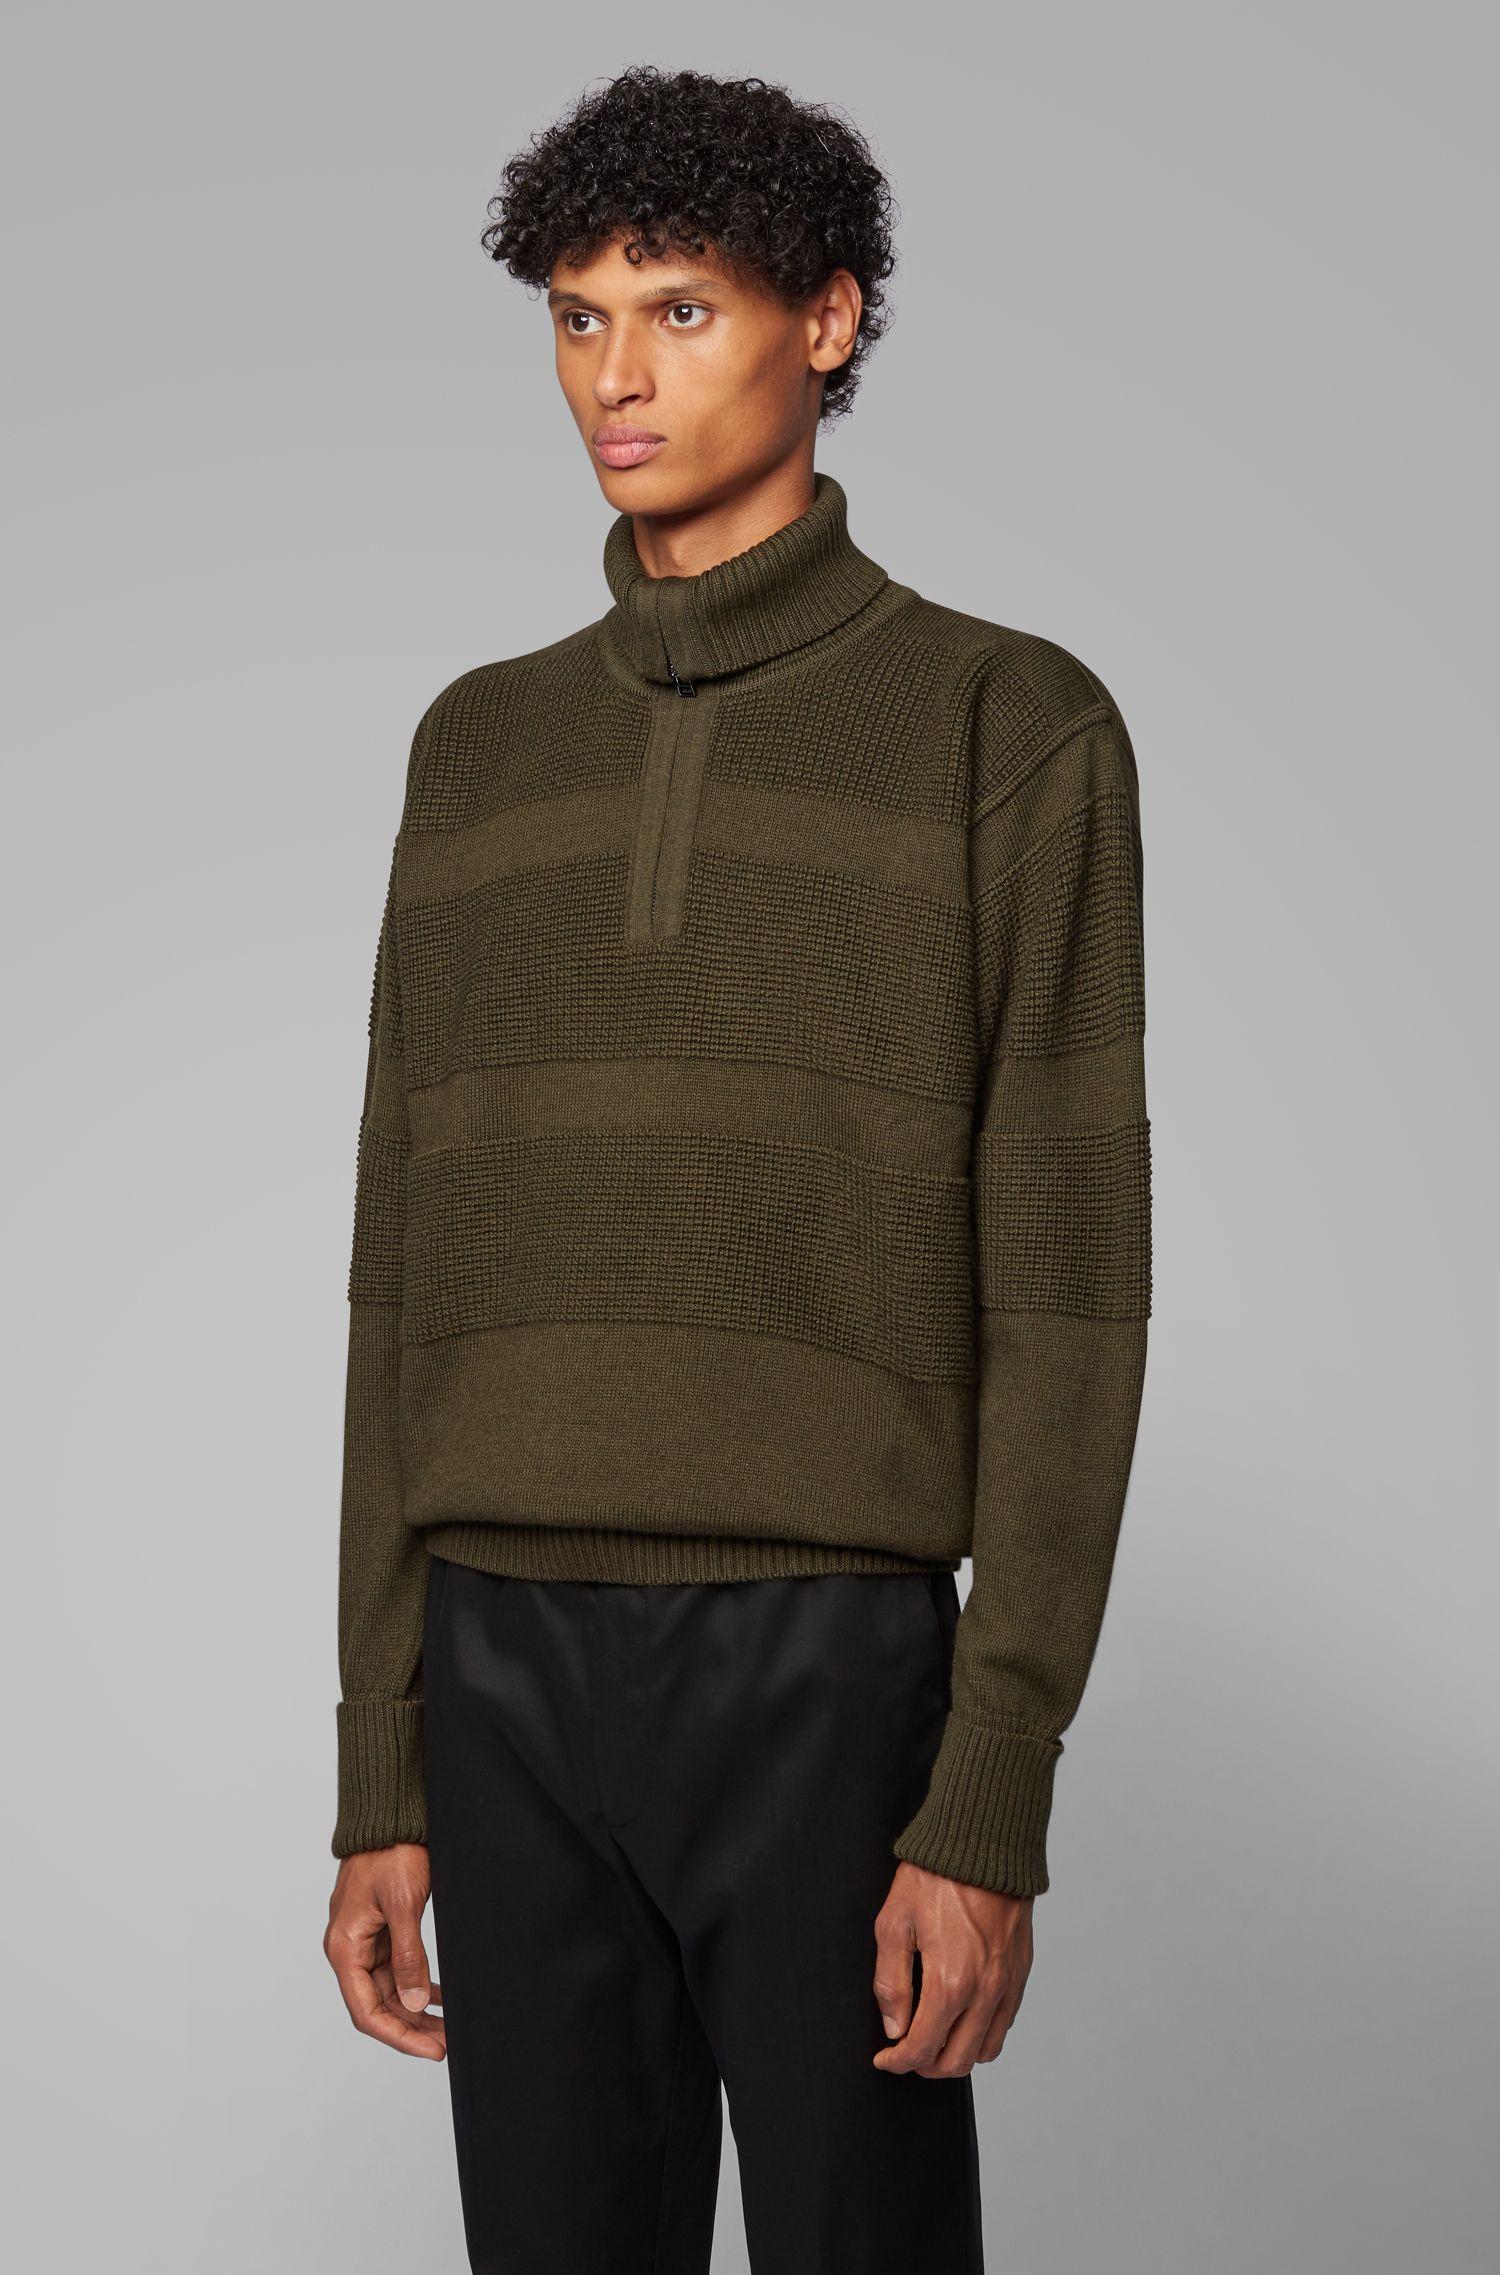 BOSS by Hugo Boss Wool Zip Neck Troyer Sweater With Structured Block ...